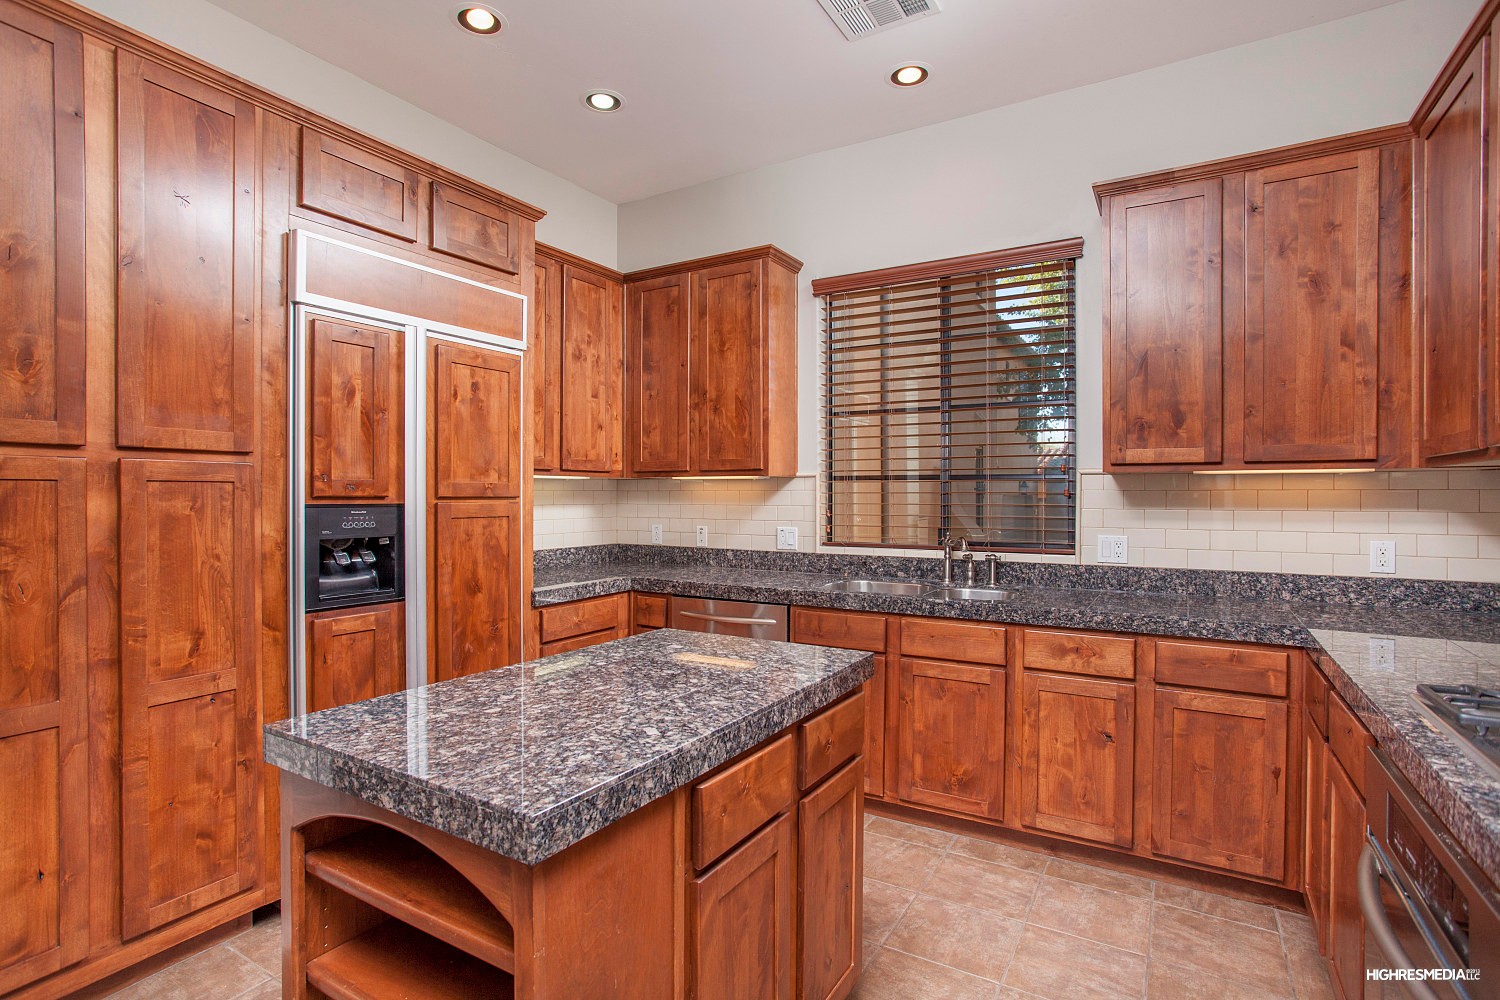 Knotty Alder cabinetry at this Scottsdale townhome for sale in Market Street at DC Ranch located at 20704 N 90th Pl #1005 Scottsdale, AZ 85255 listed by Don Matheson at The Matheson Team